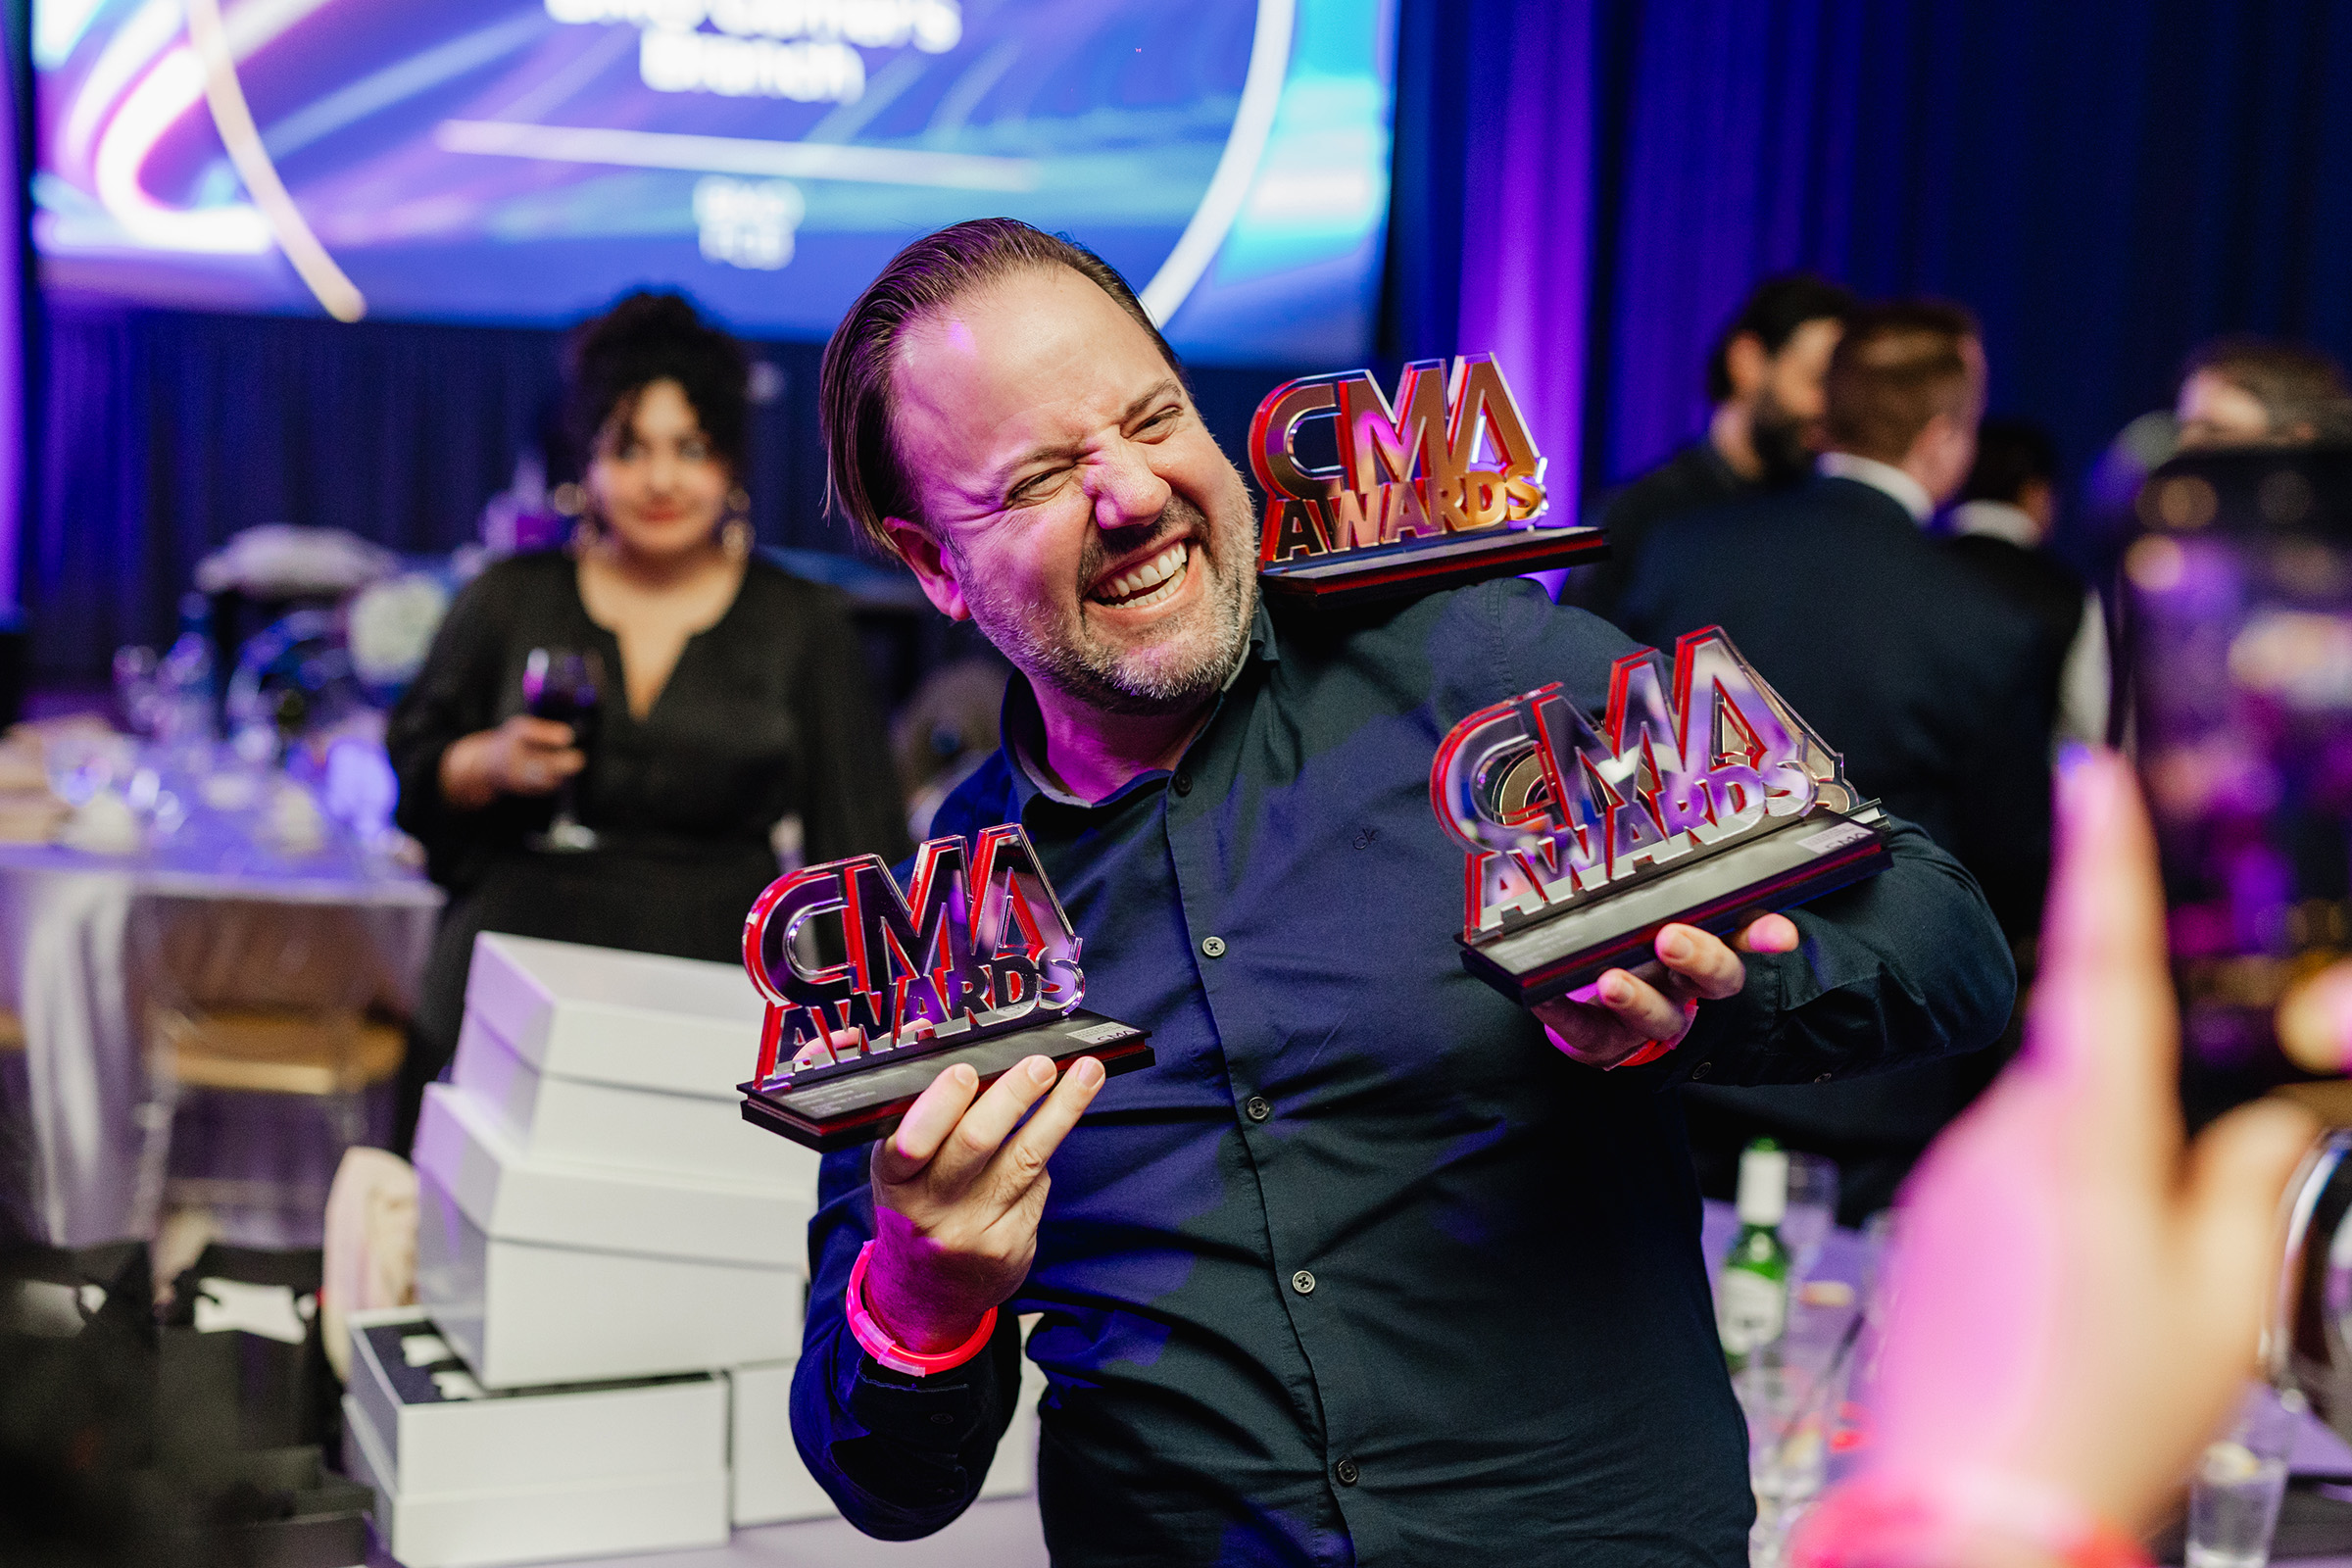 A man showcasing his impressive content creation while proudly holding up two awards at a party.